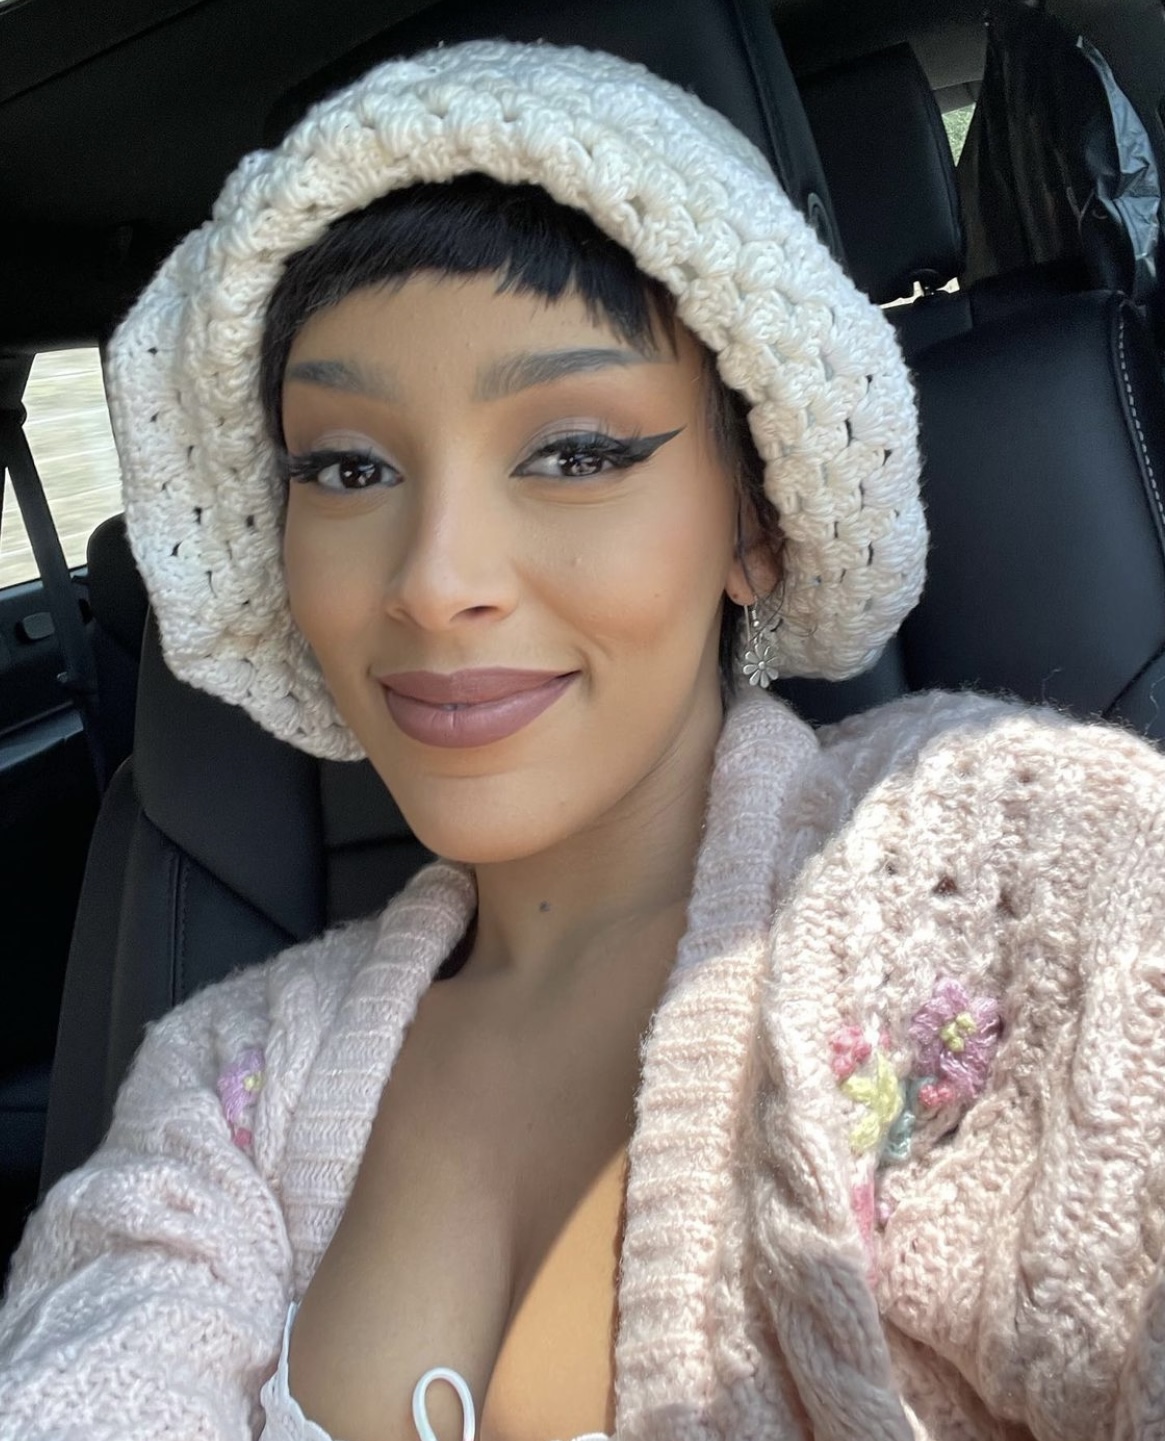 Influencer With Boobs So Big She Had To Buy A New Car Wants To Go Bigger  With Another Enhancement Surgery